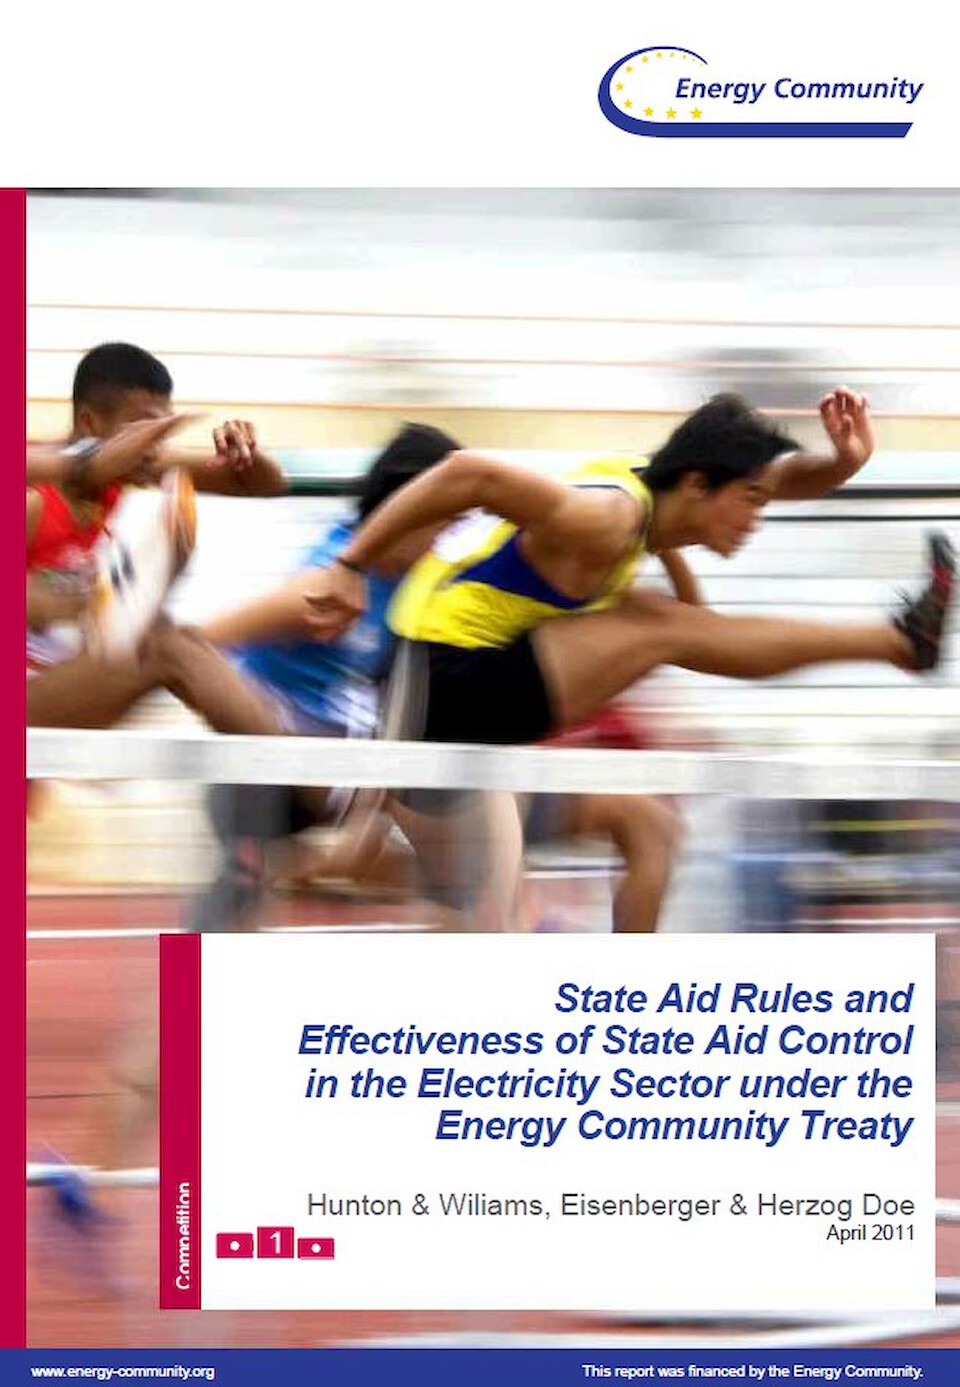 State Aid Rules and Effectiveness of State Aid Control in the Electricity Sector under the Energy Community Treaty